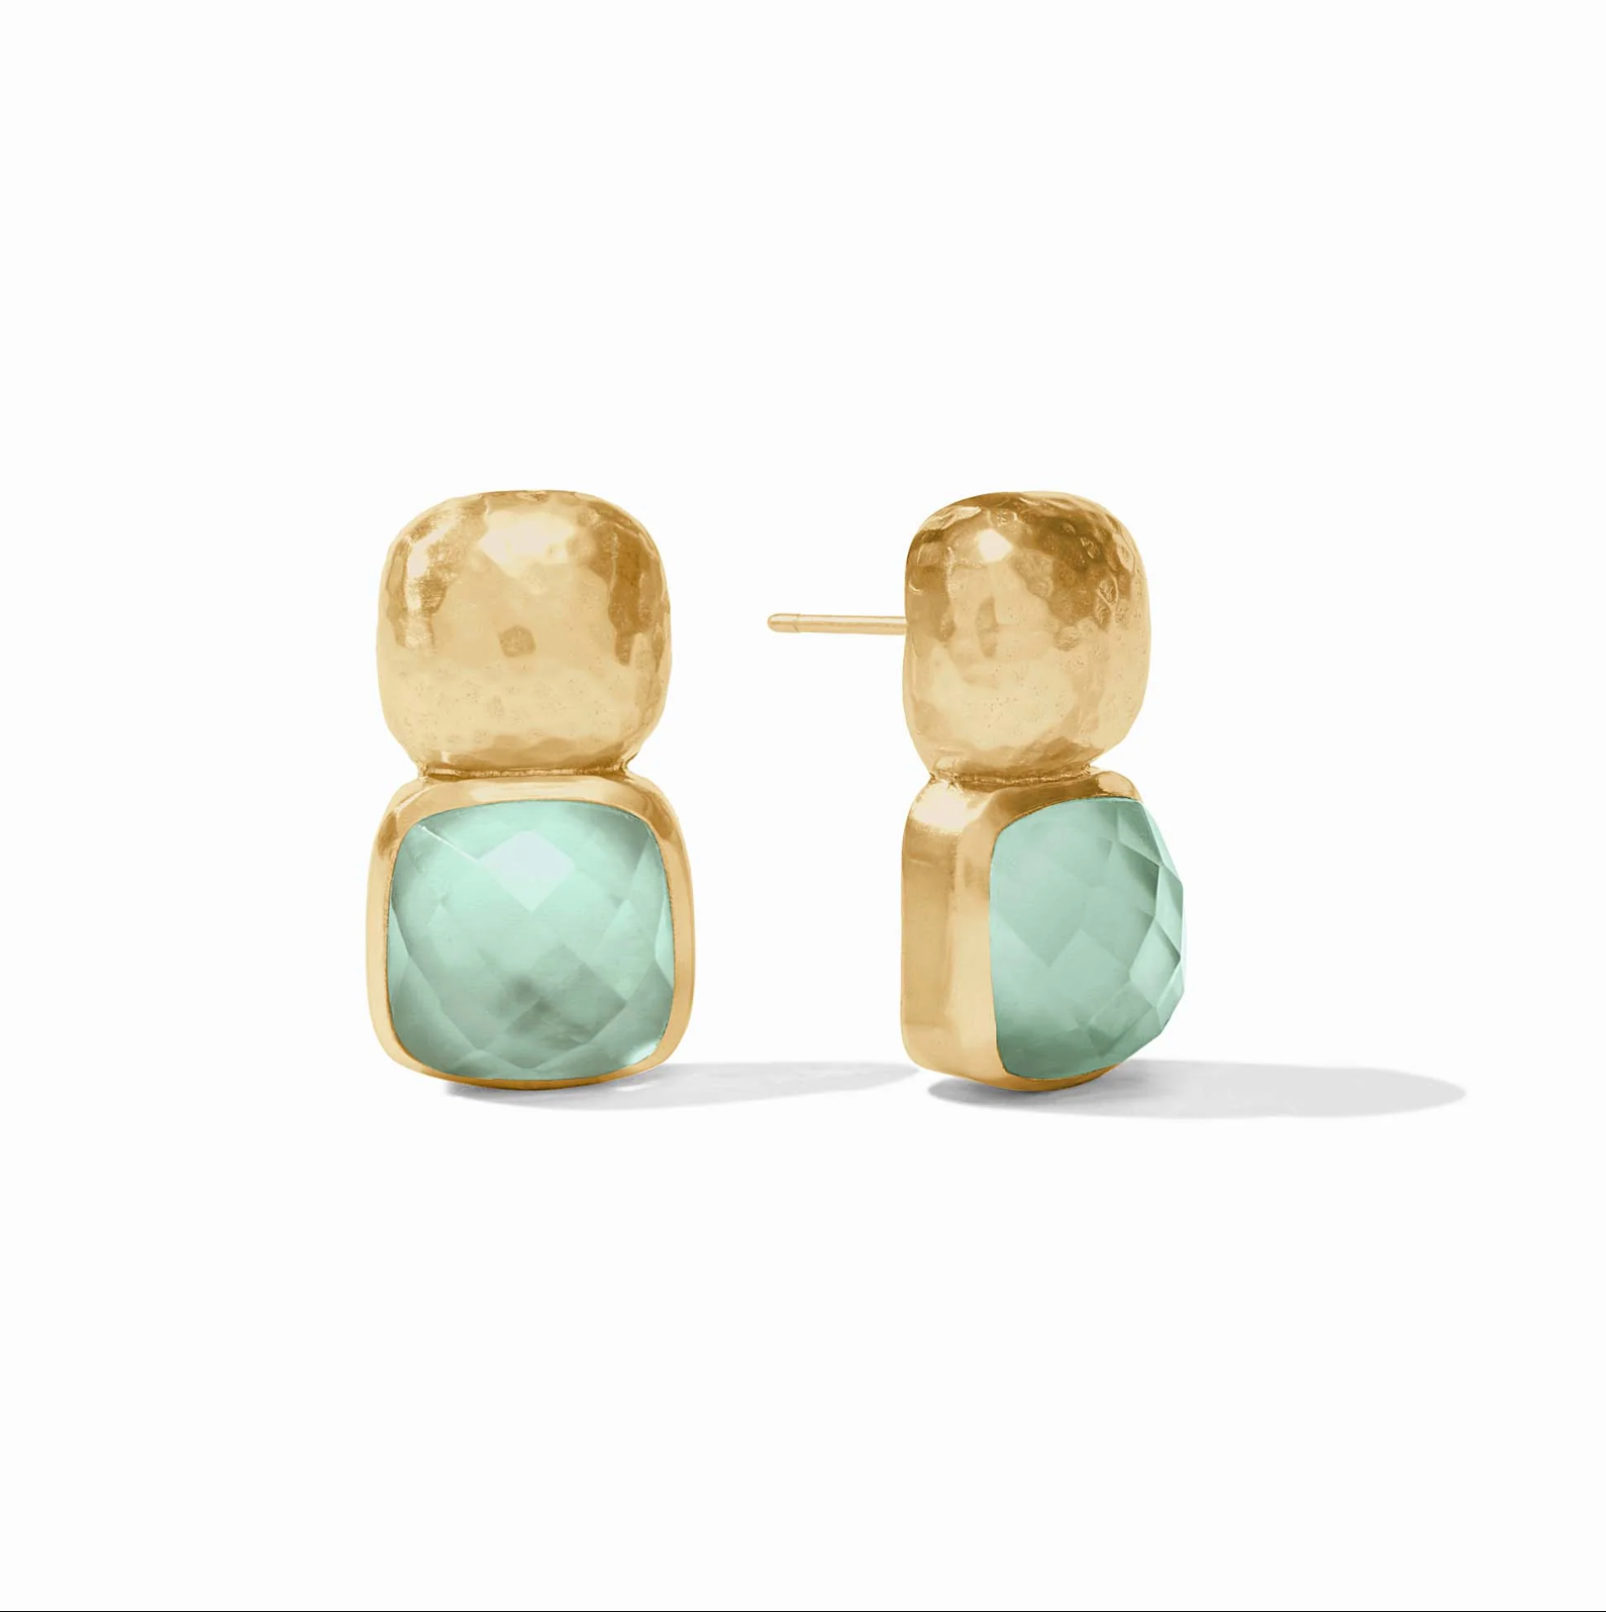 Catalina Earring in Iridescent Aquamarine Blue - The French Shoppe